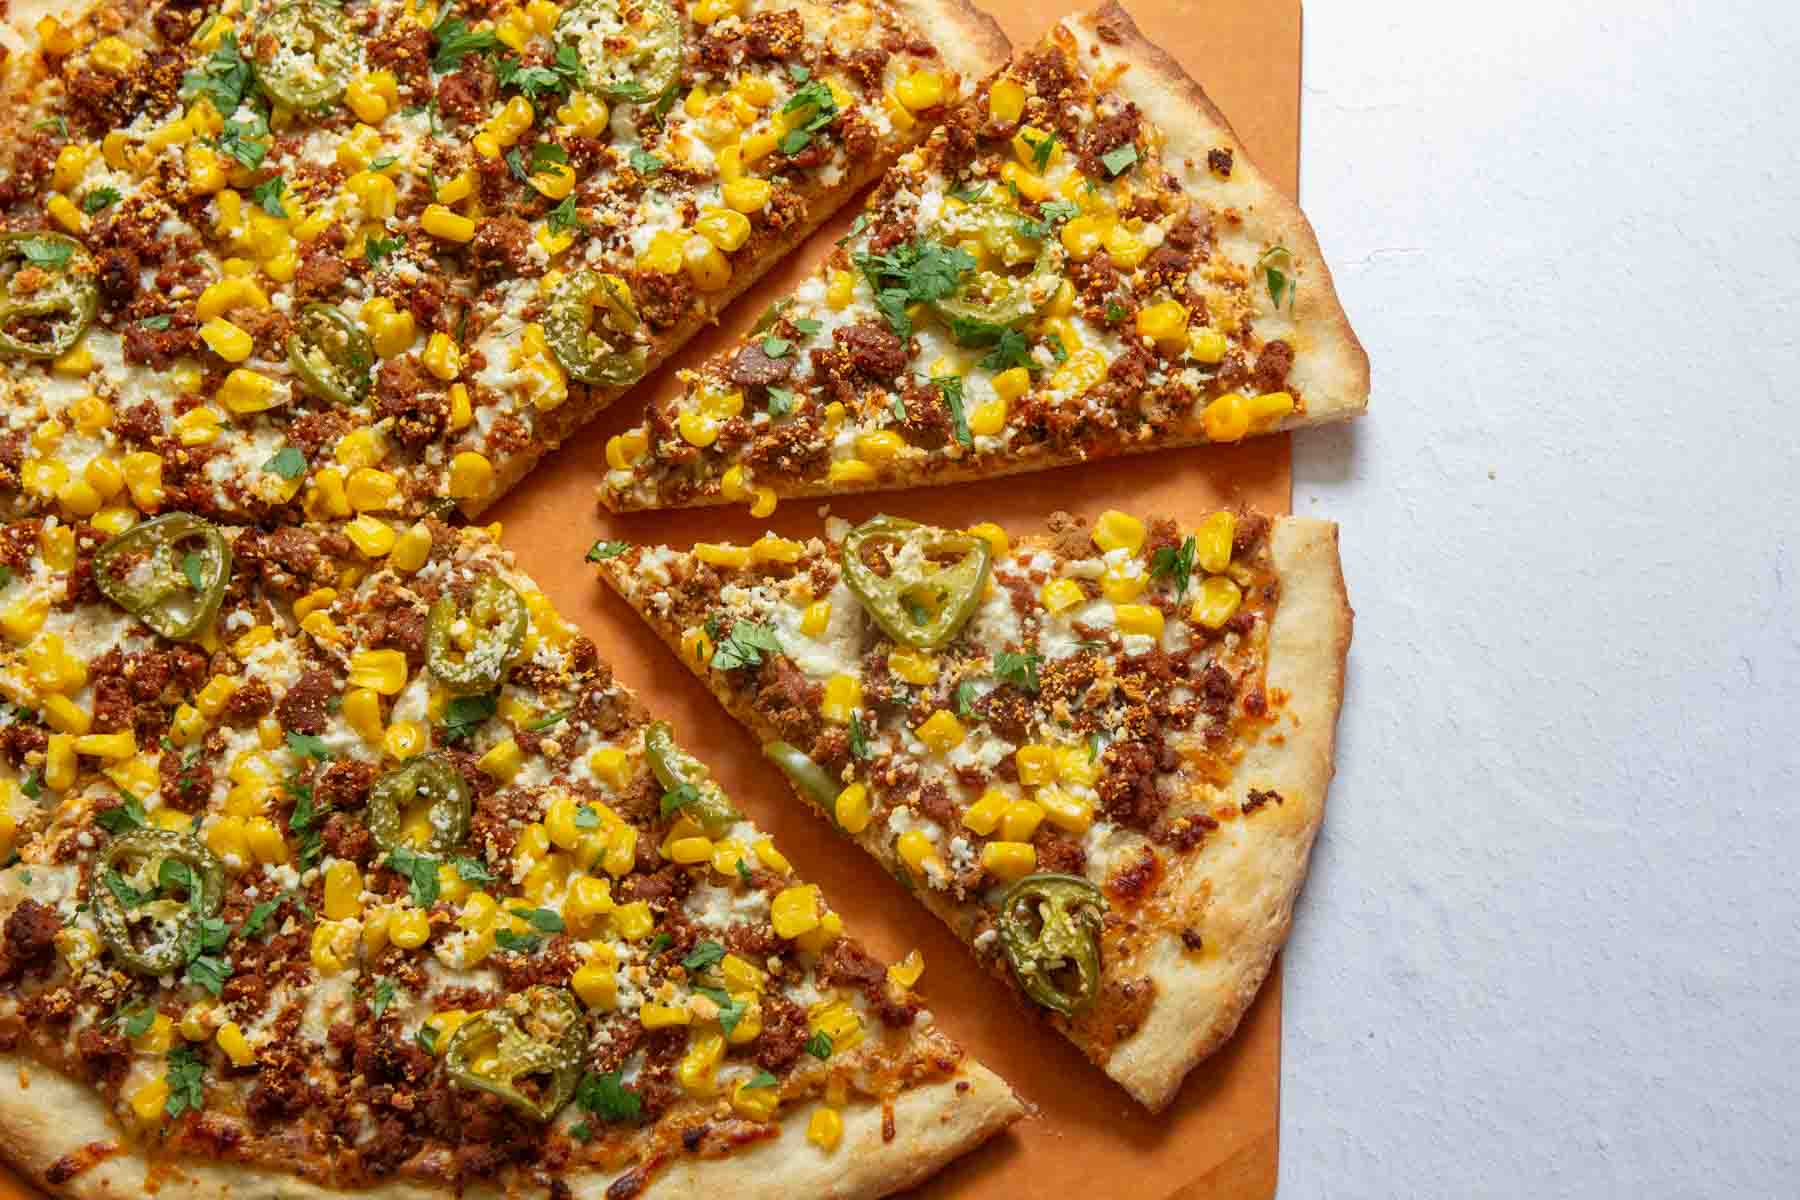 A pizza topped with ground meat, corn, jalapenos, and cheese is cut into slices on an orange surface.